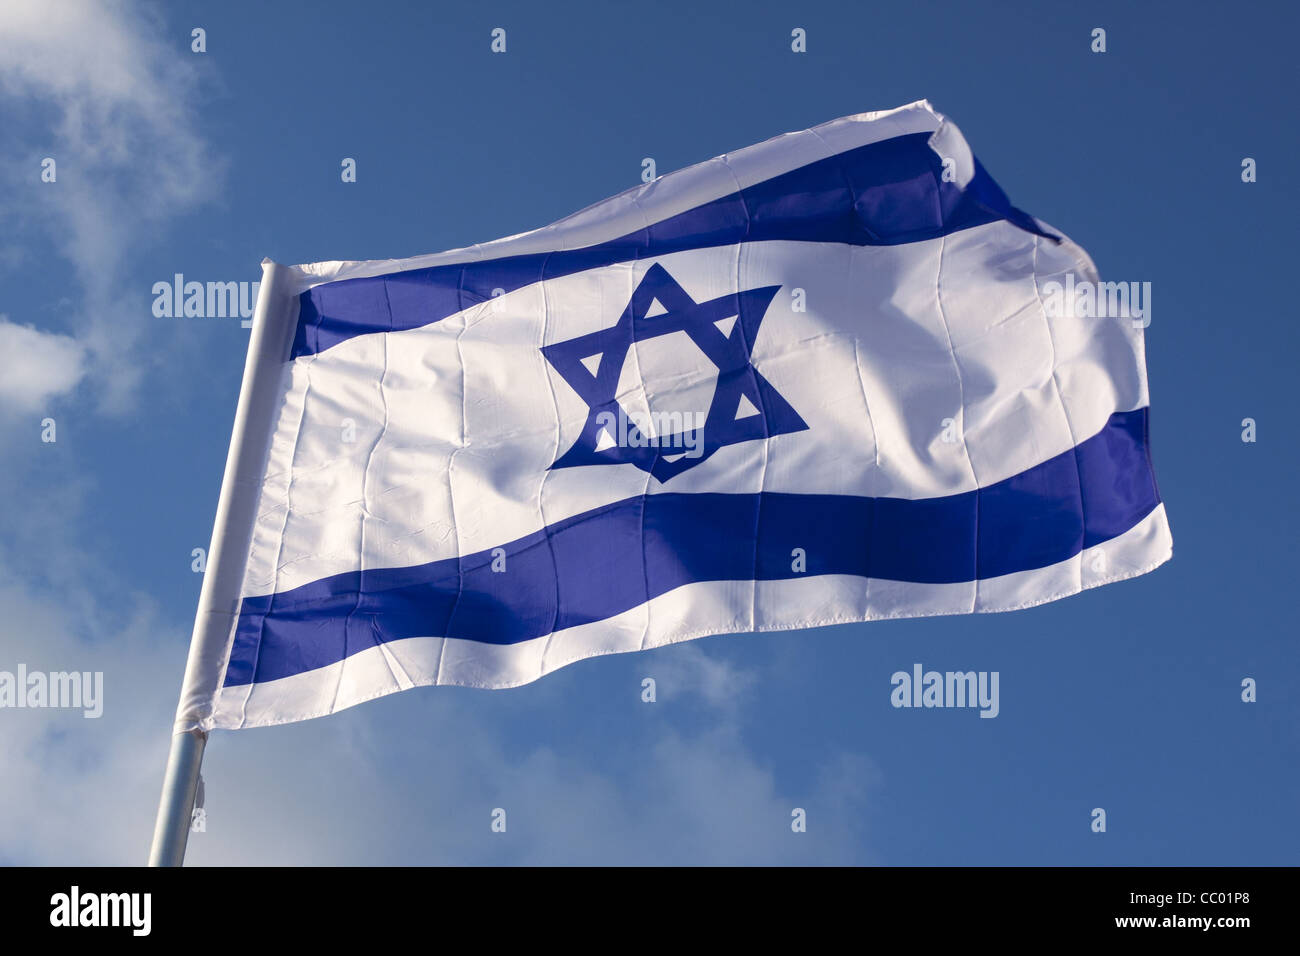 ISRAELI FLAG WITH THE STAR OF DAVID FLOATING IN A BLUE SKY, TEL AVIV, ISRAEL Stock Photo